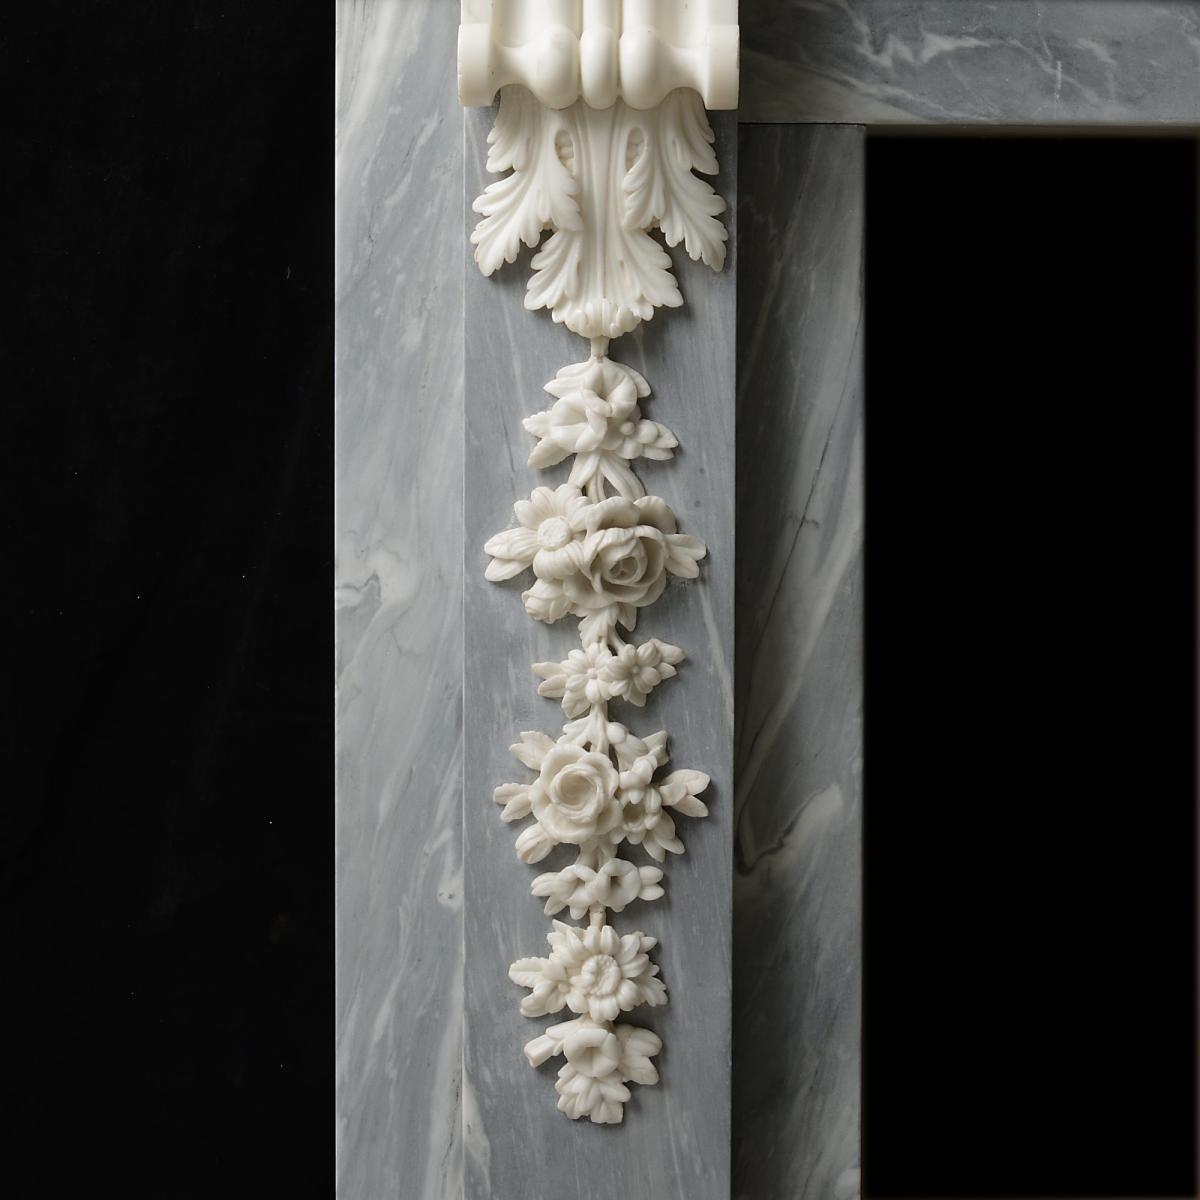 Chimneypiece Designed by James Paine